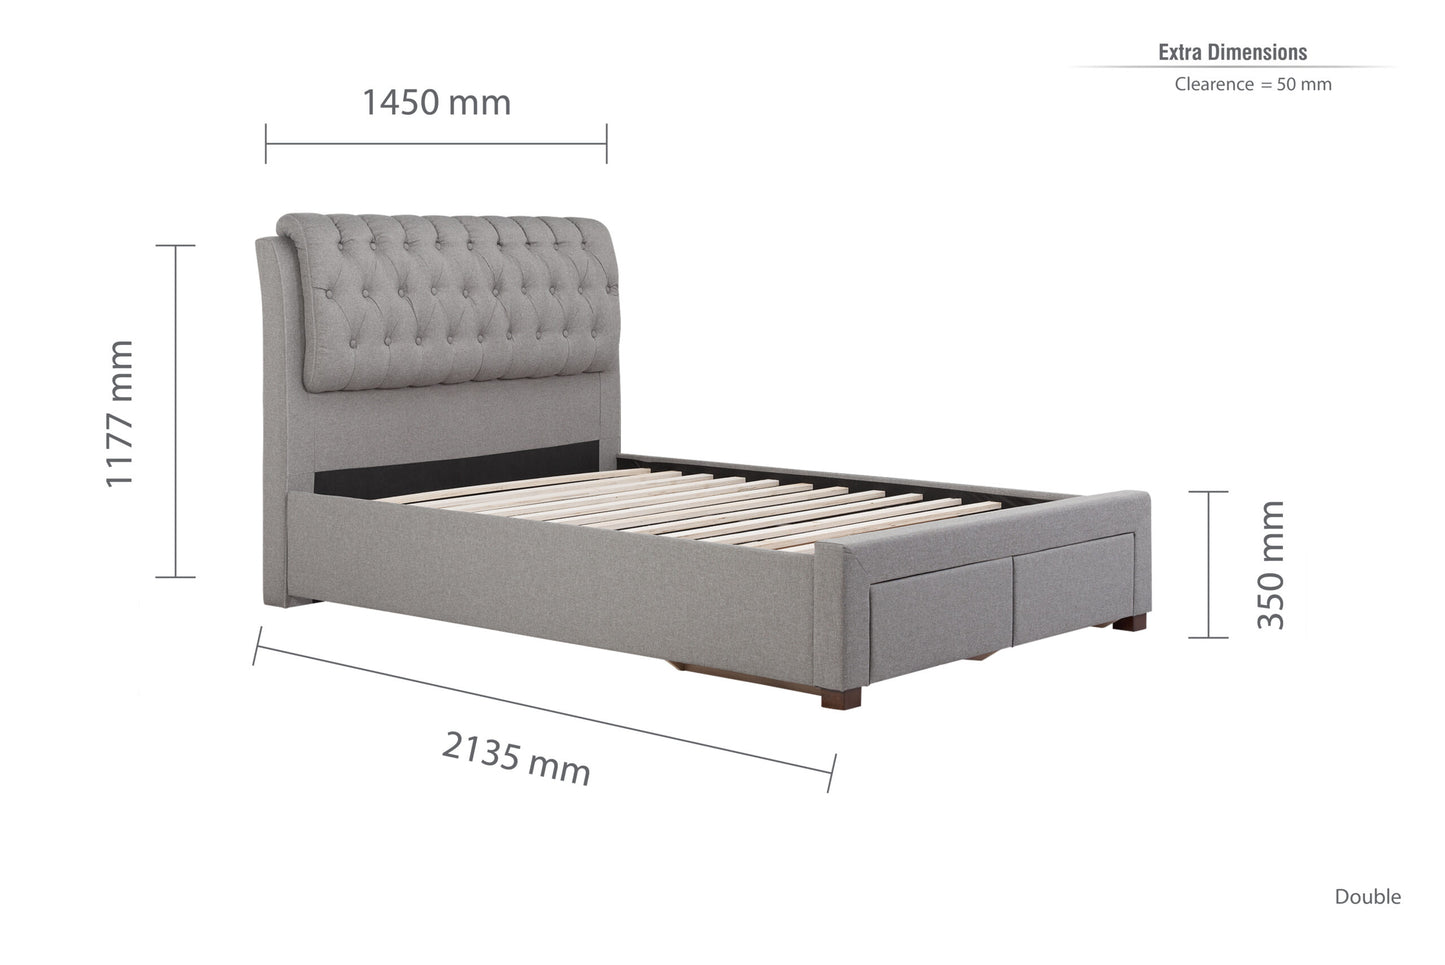 Birlea Valentino 2 Drawer 4ft 6in Double Bed Frame, Grey